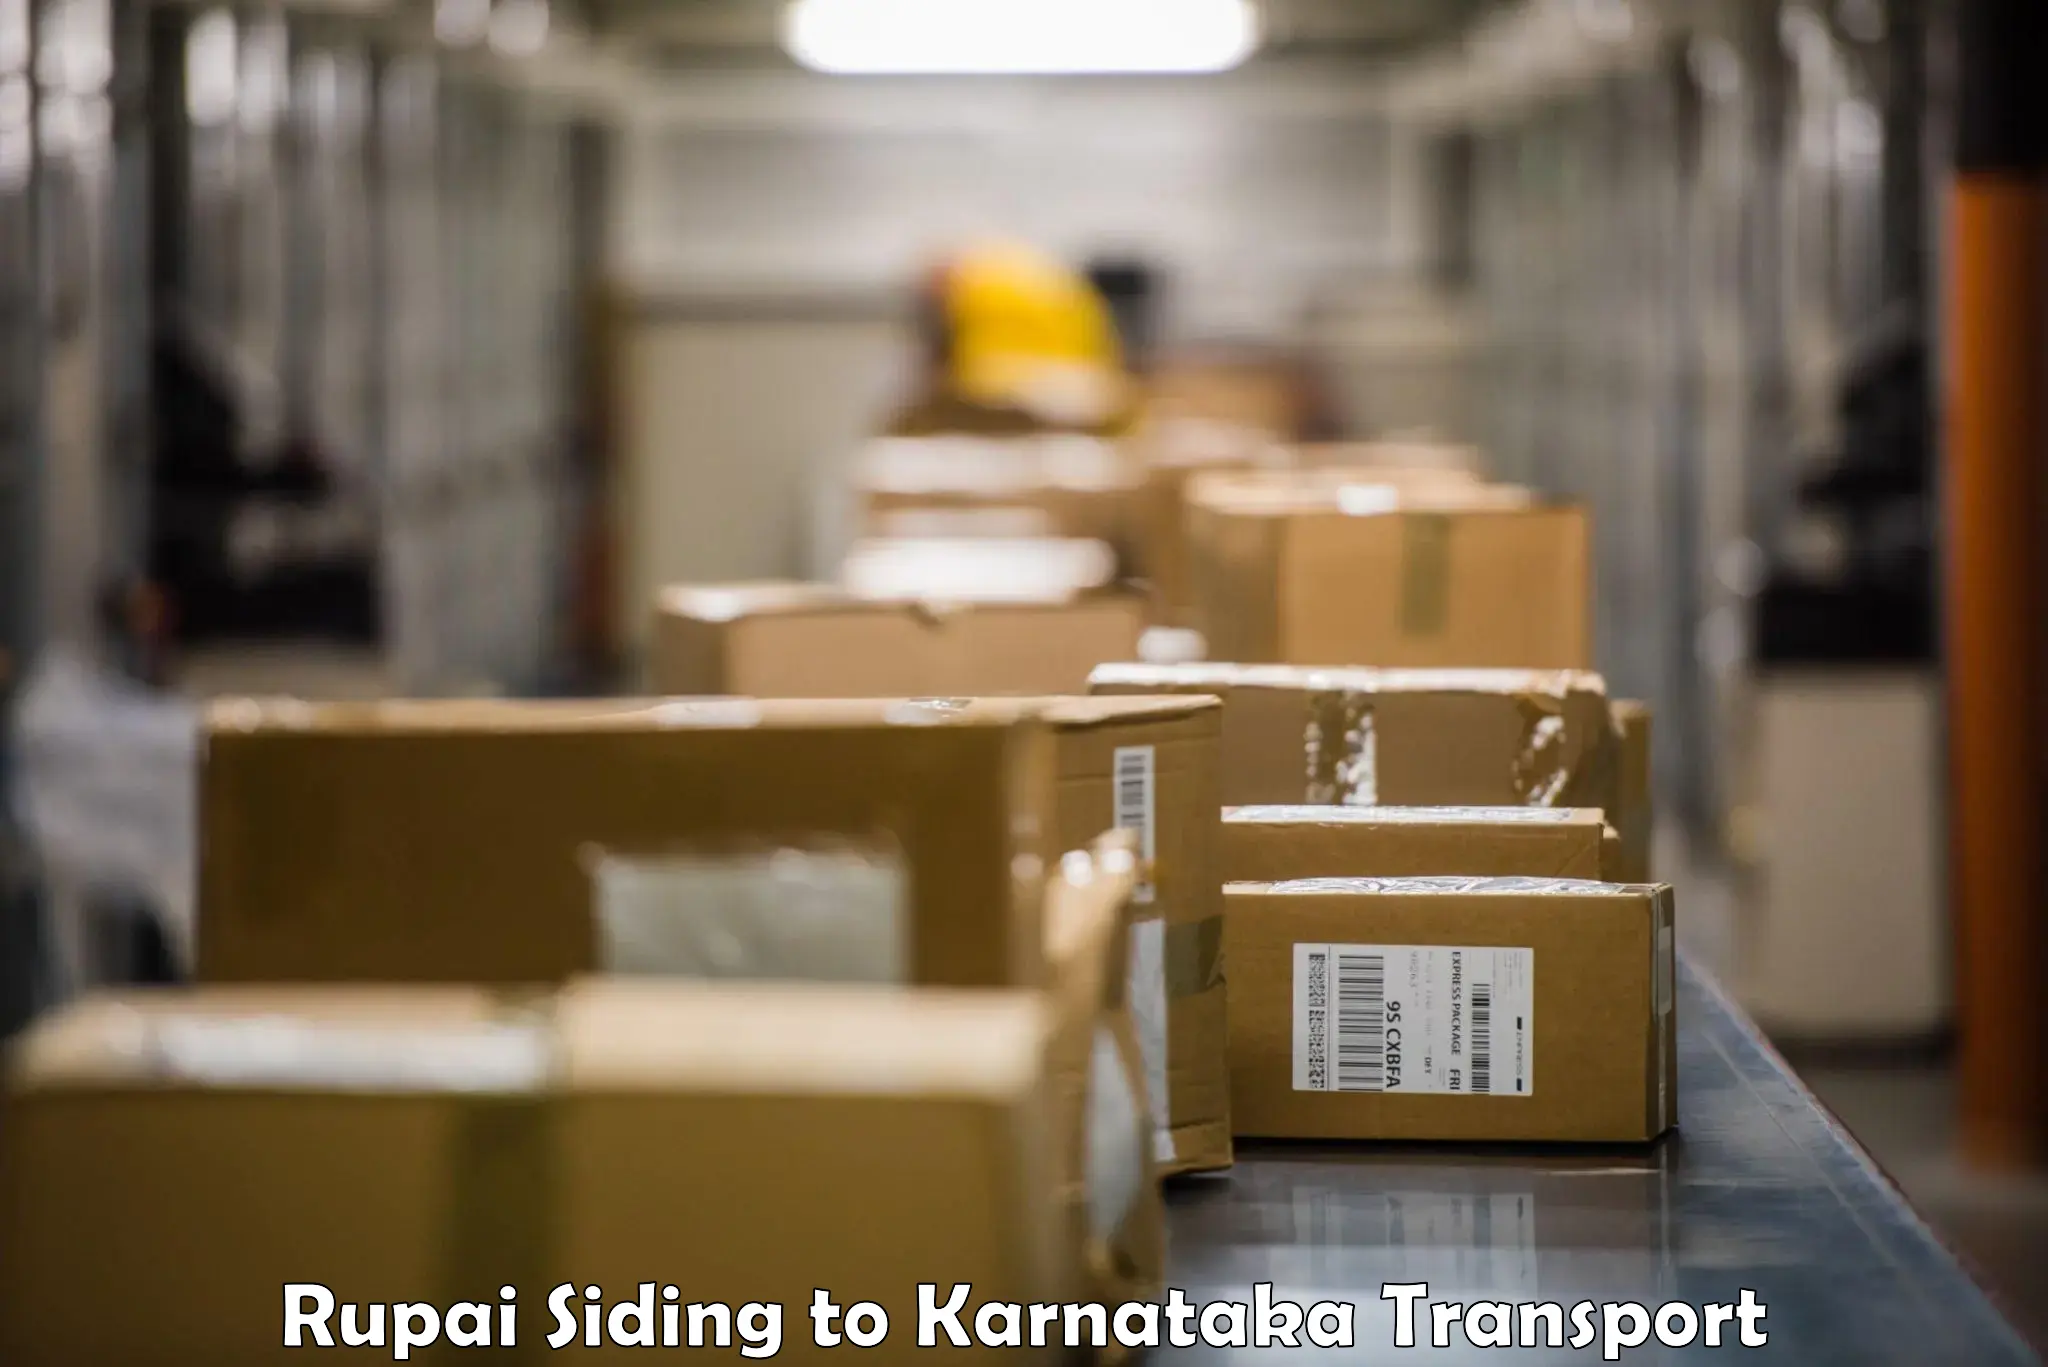 Road transport online services Rupai Siding to Bangalore